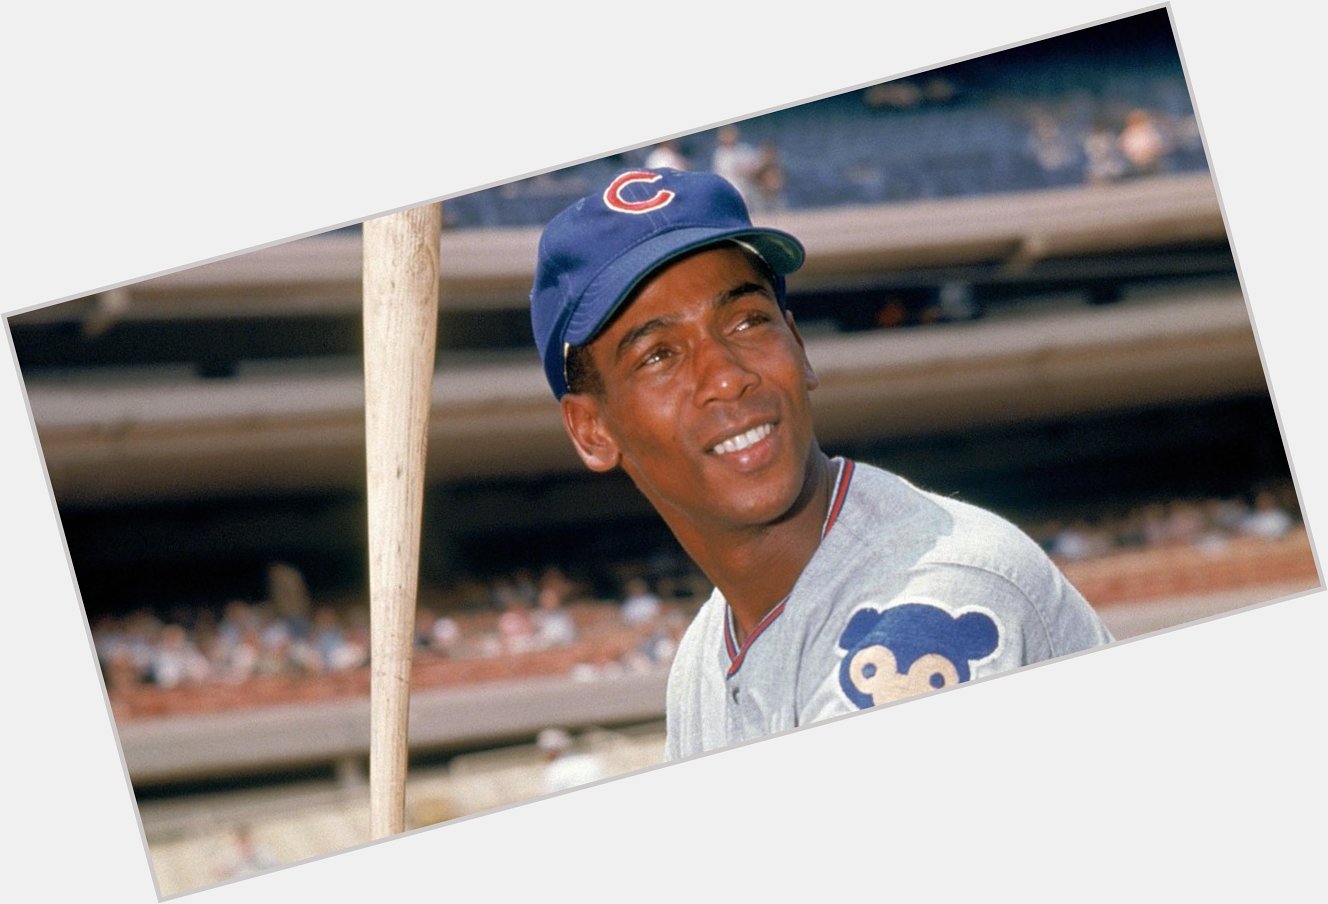 Happy Birthday to Ernie Banks! Mr. Cub would\ve celebrated his 87th today. 